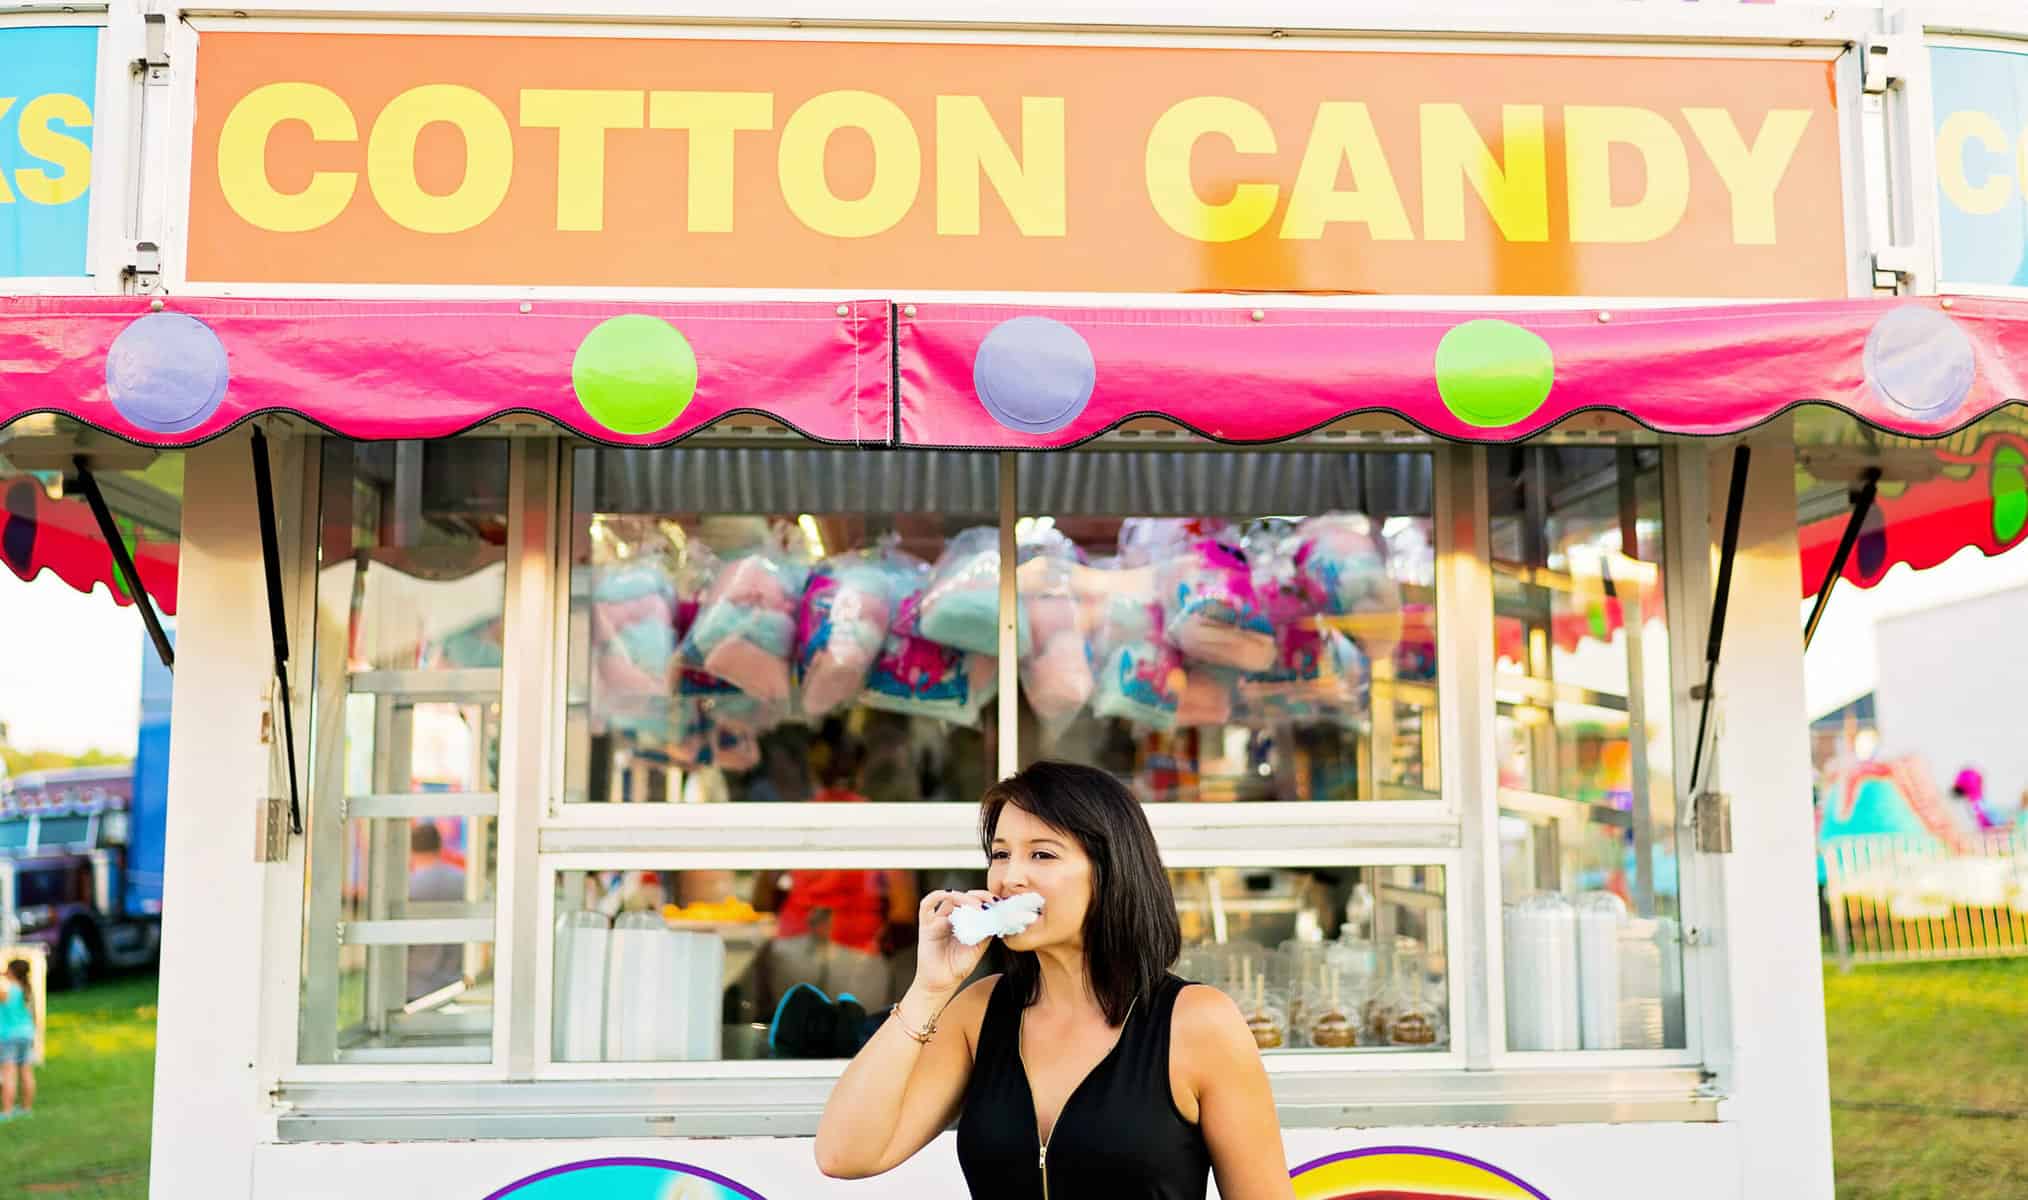 A woman is standing in front of a cotton candy stand.